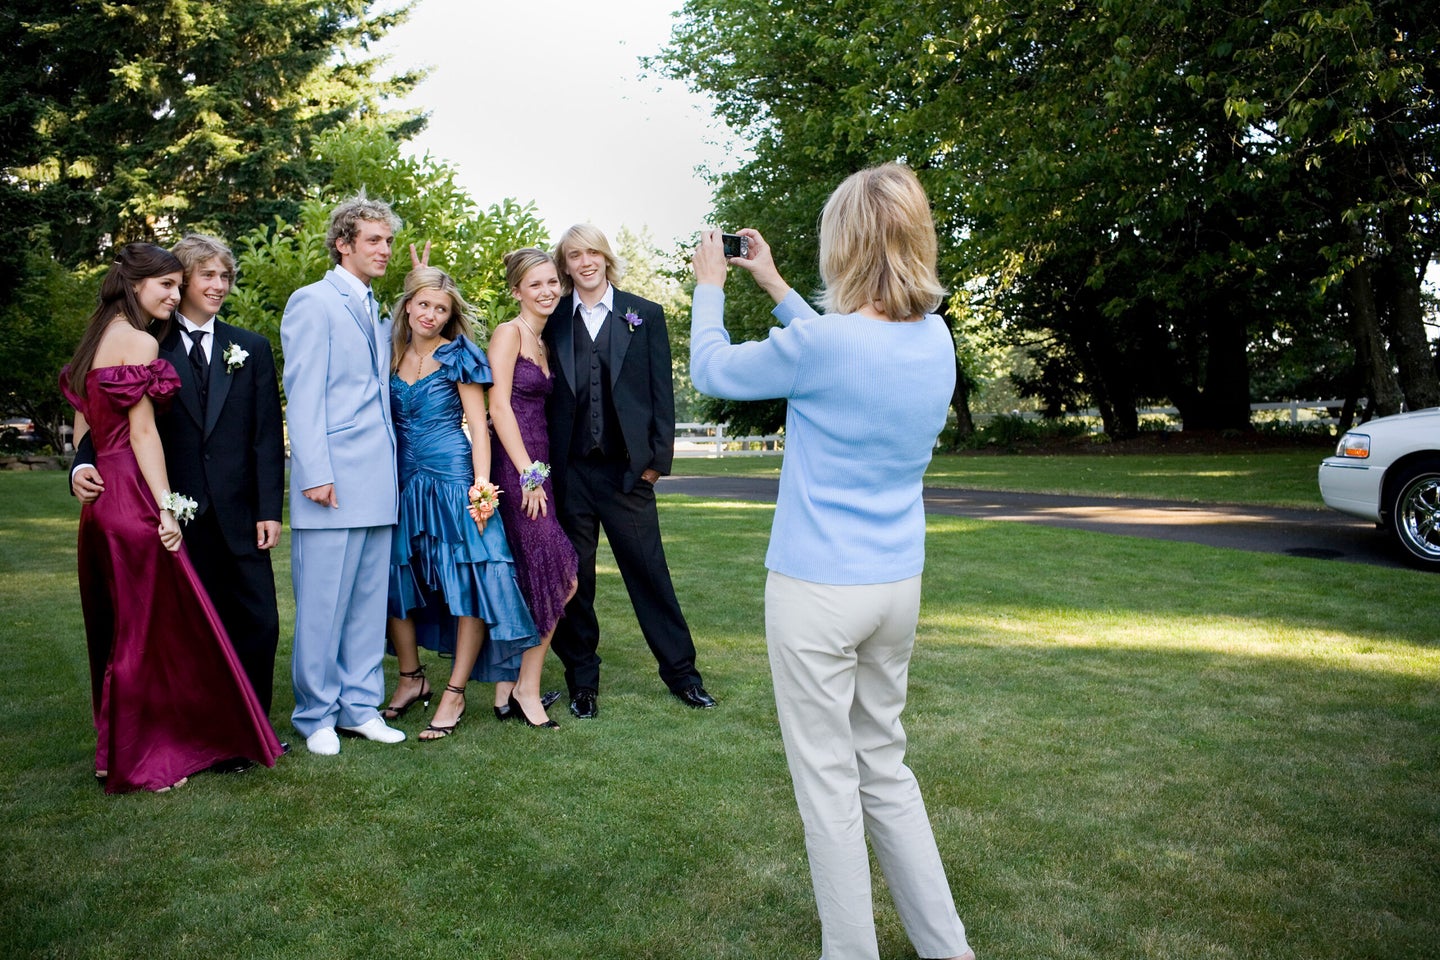 Mother photographing three teenage couples before prom.